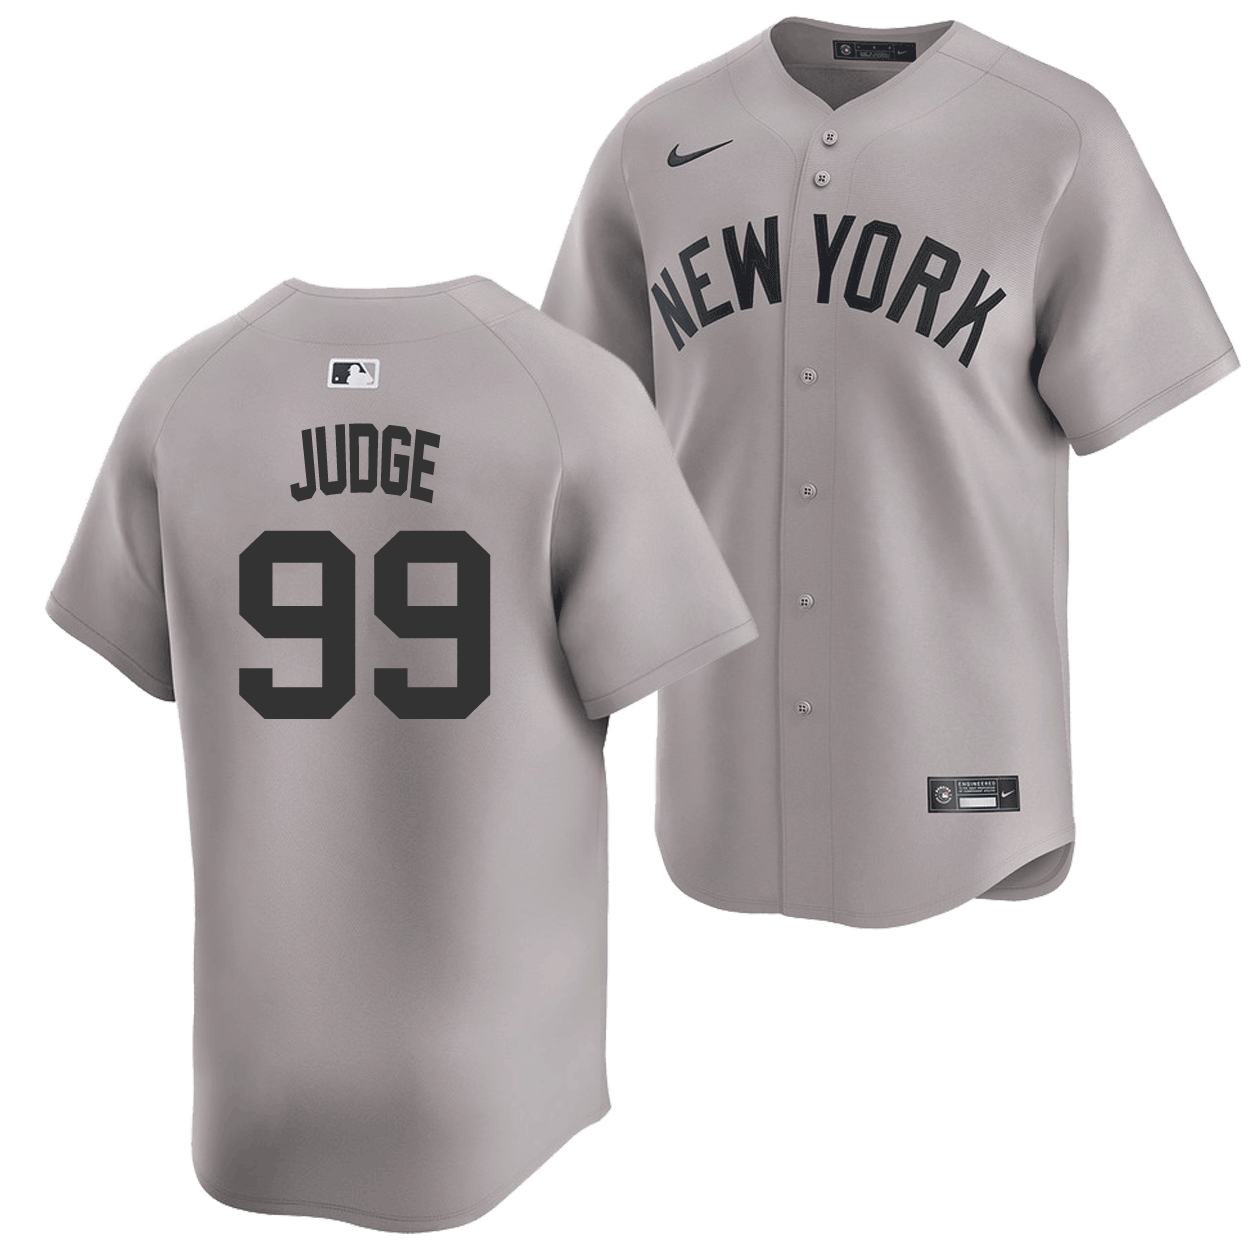 Aaron Judge Jersey - NY Yankees Limited Adult Road Jersey